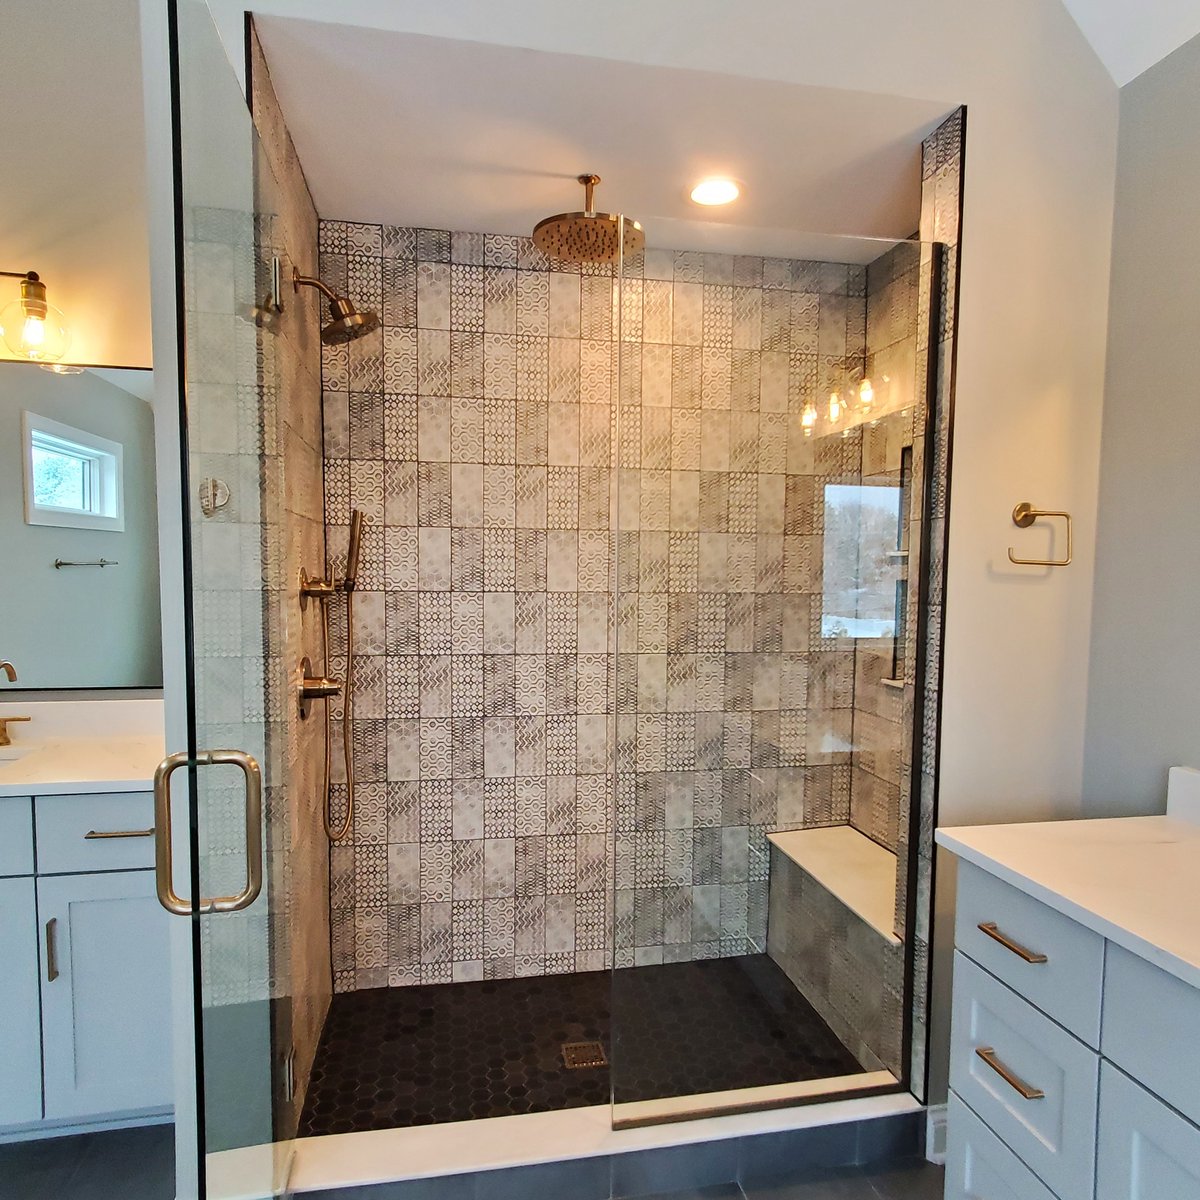 We love the unique geometric designs of these shower #walltiles! Our #modelhome is open from 11 am - 5 pm at 4012 Alfalfa Ln #Naperville #newhome #newhomedesign #newhomebuilder #newhomeconstruction #homebuilder #customhome #customhomebuilder #bathroomdesign #bathroominspo